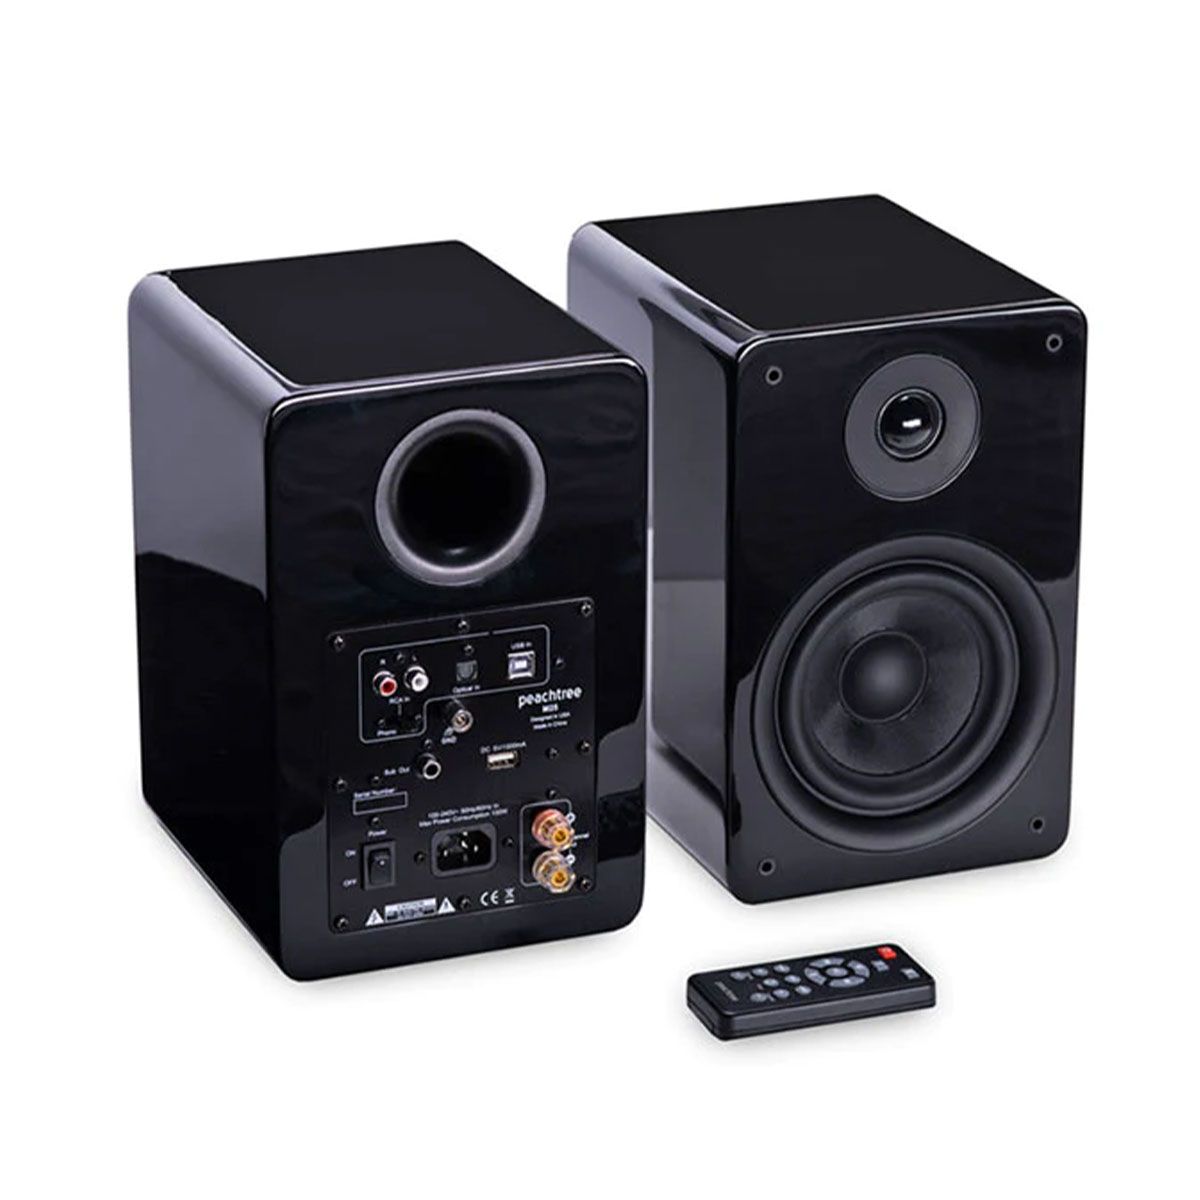 Peachtree M25 Powered Speakers - Black pair - angled rear and front views